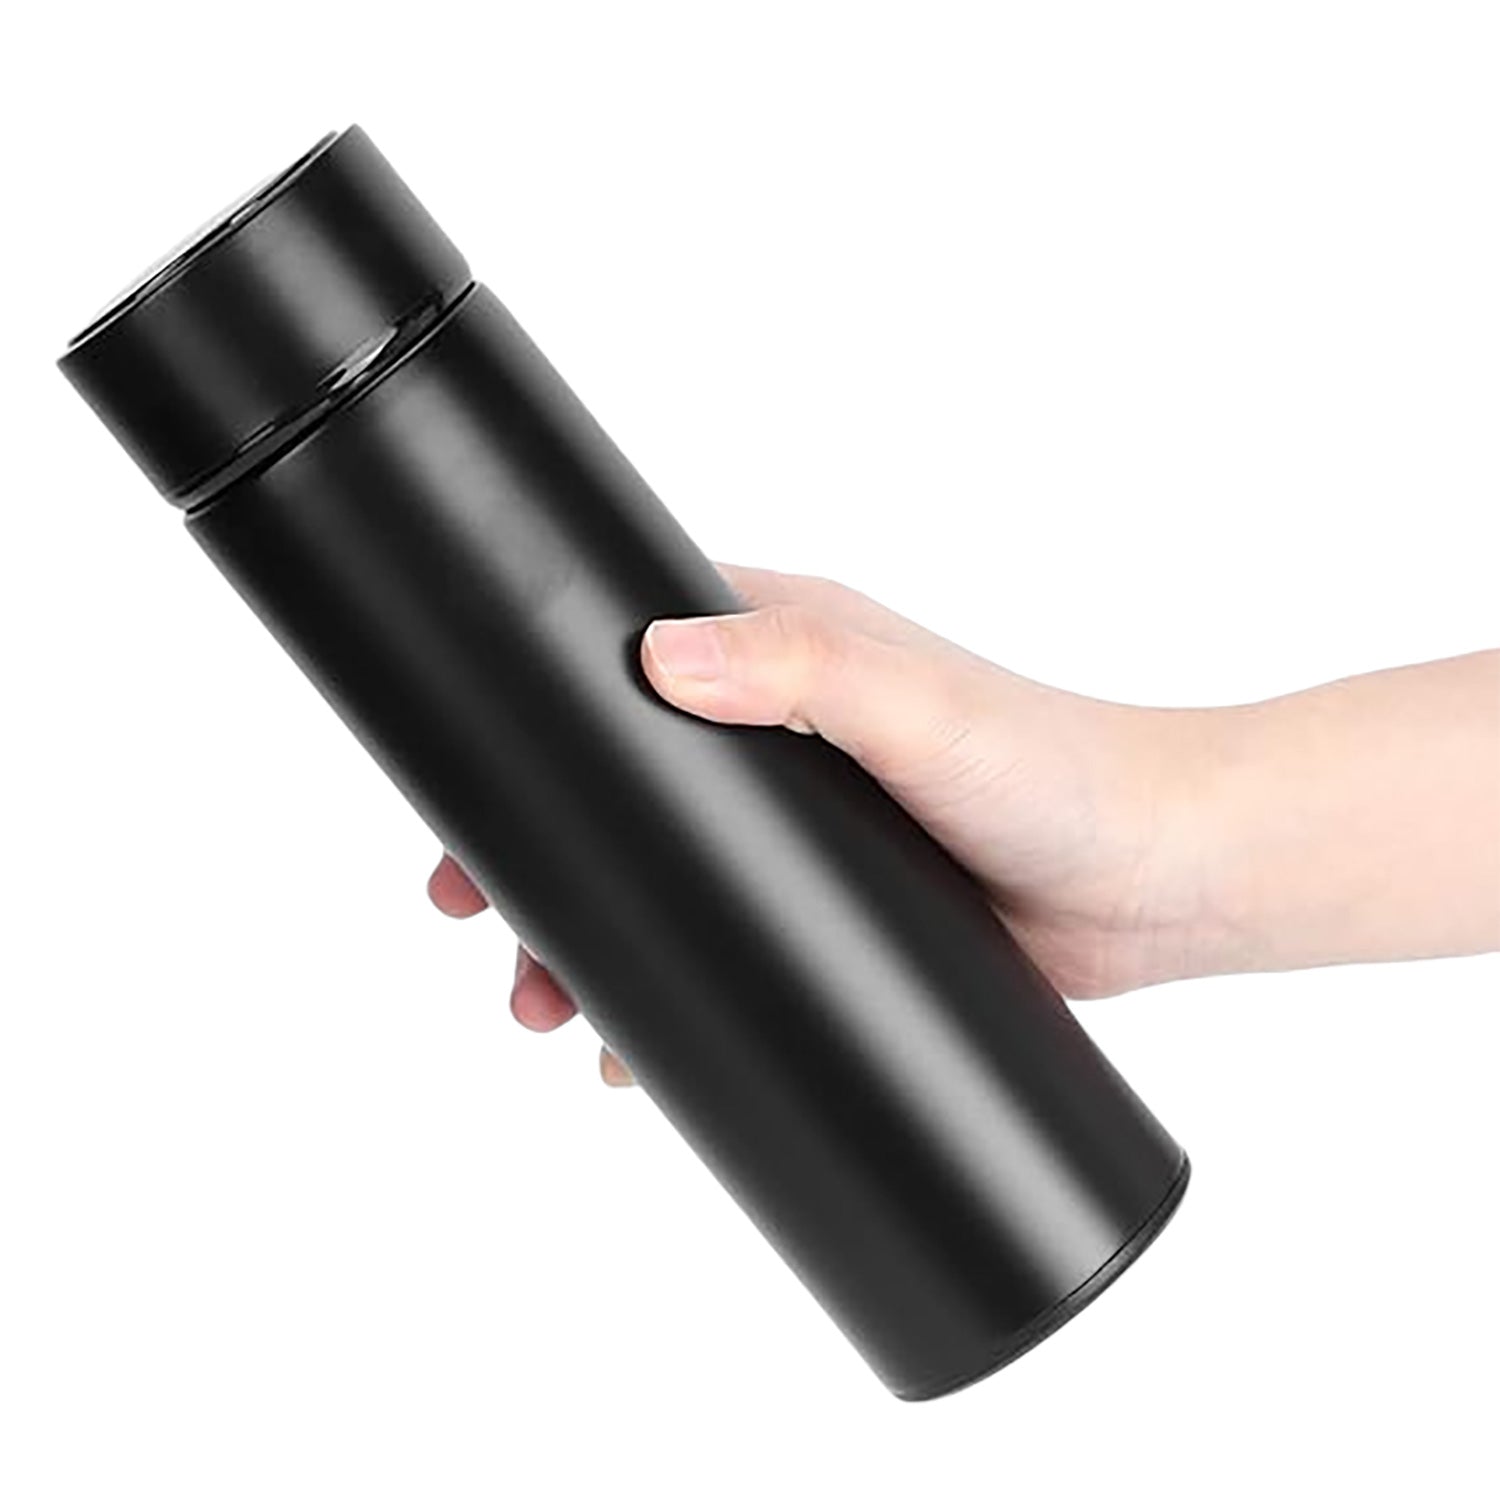 Black Stainless Steel Water Bottle with Temperature Display | Insulated Bottle For Hot and Cold Water - for Kids Birthday & Return Gifts - Apkamart